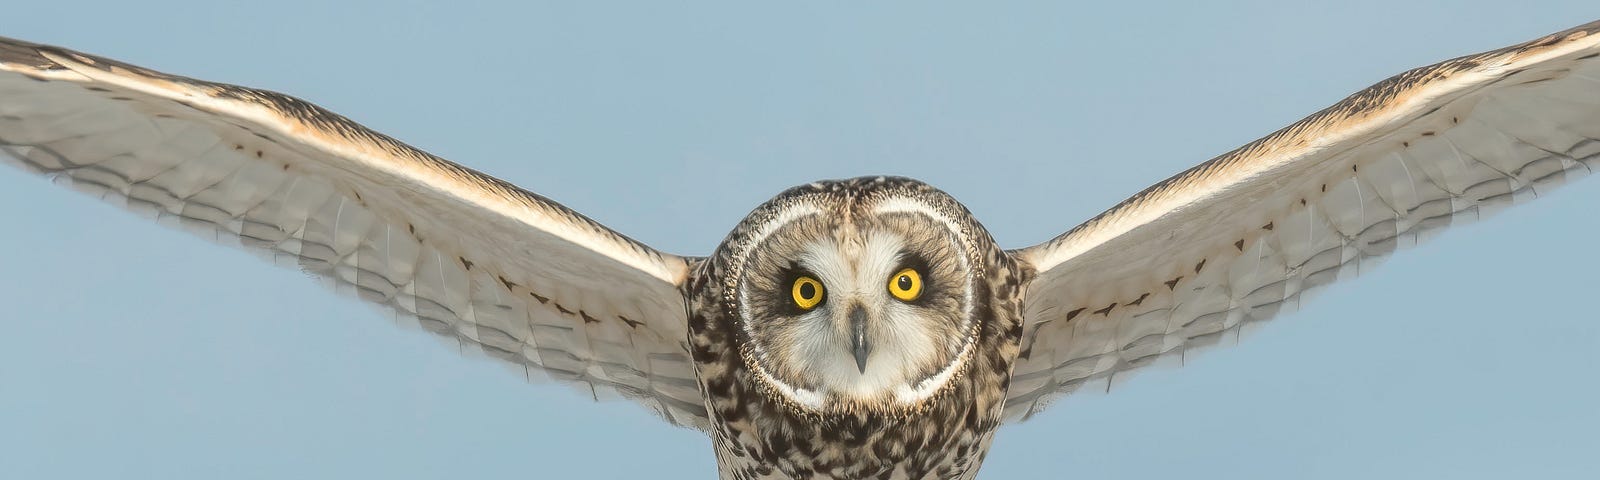 Owl in flight with total focus